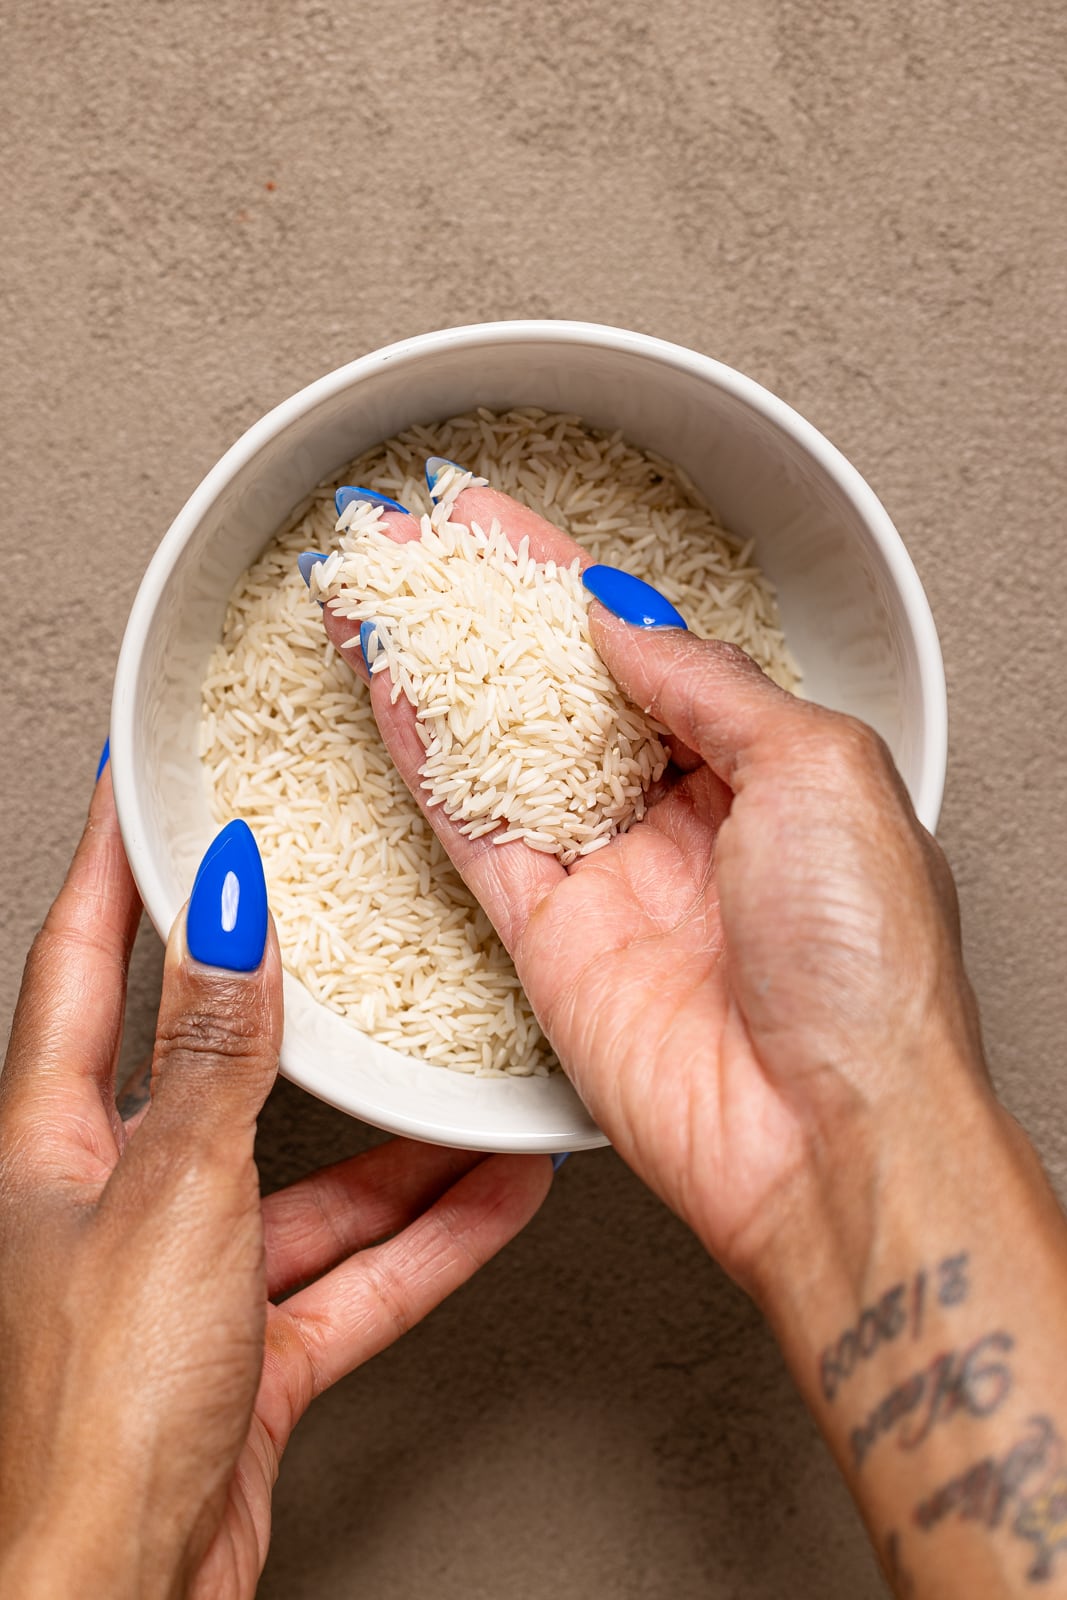 Dry rice in a bowl being held with hands.